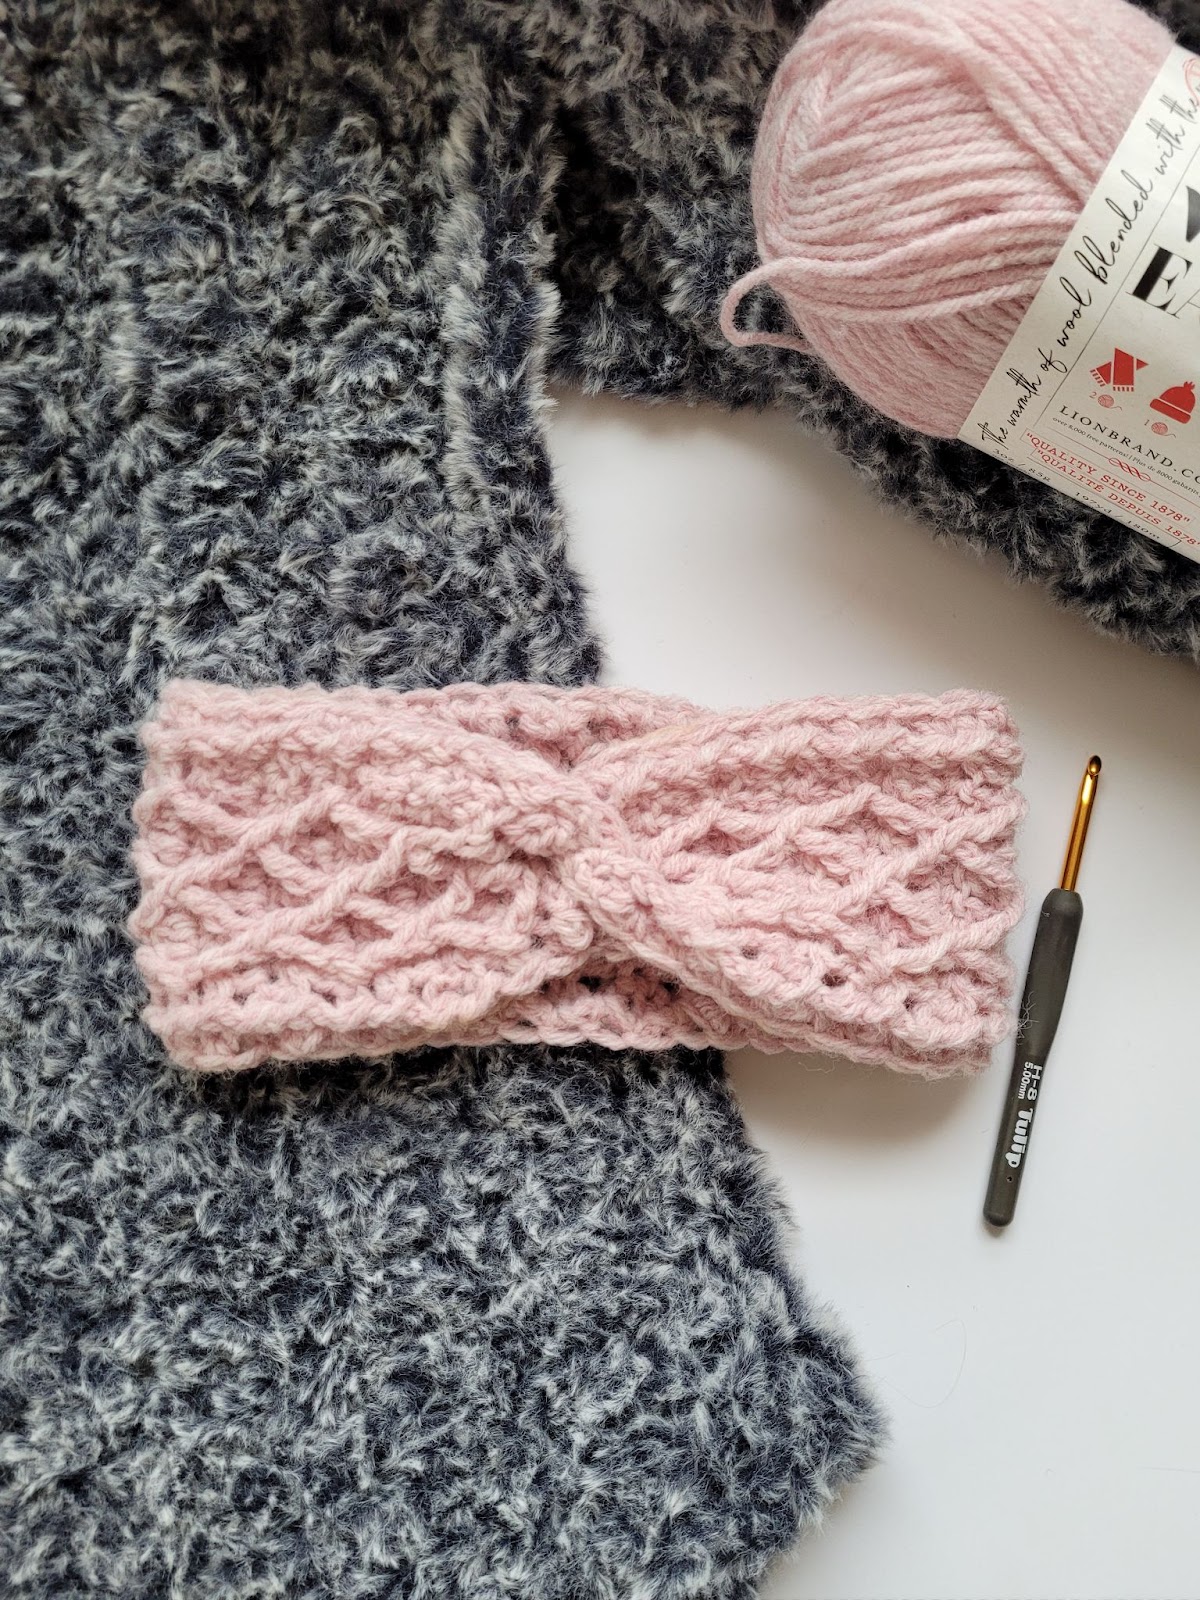 Wip Wednesday Crochet Along - The Molly Cabled Blanket - CocoCrochetLee